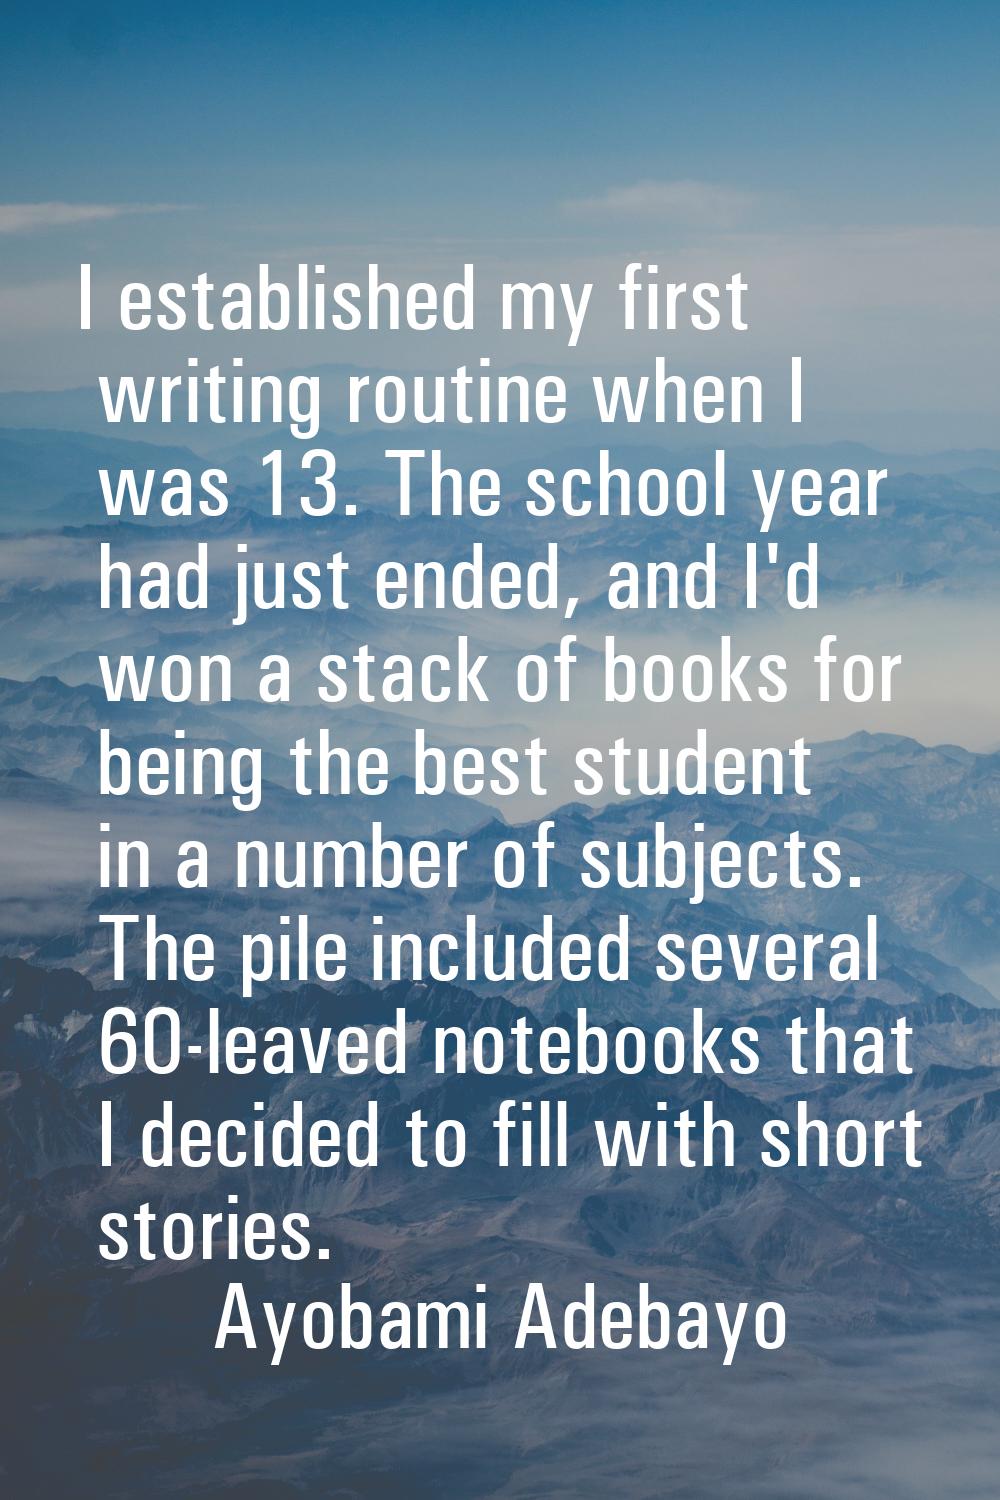 I established my first writing routine when I was 13. The school year had just ended, and I'd won a